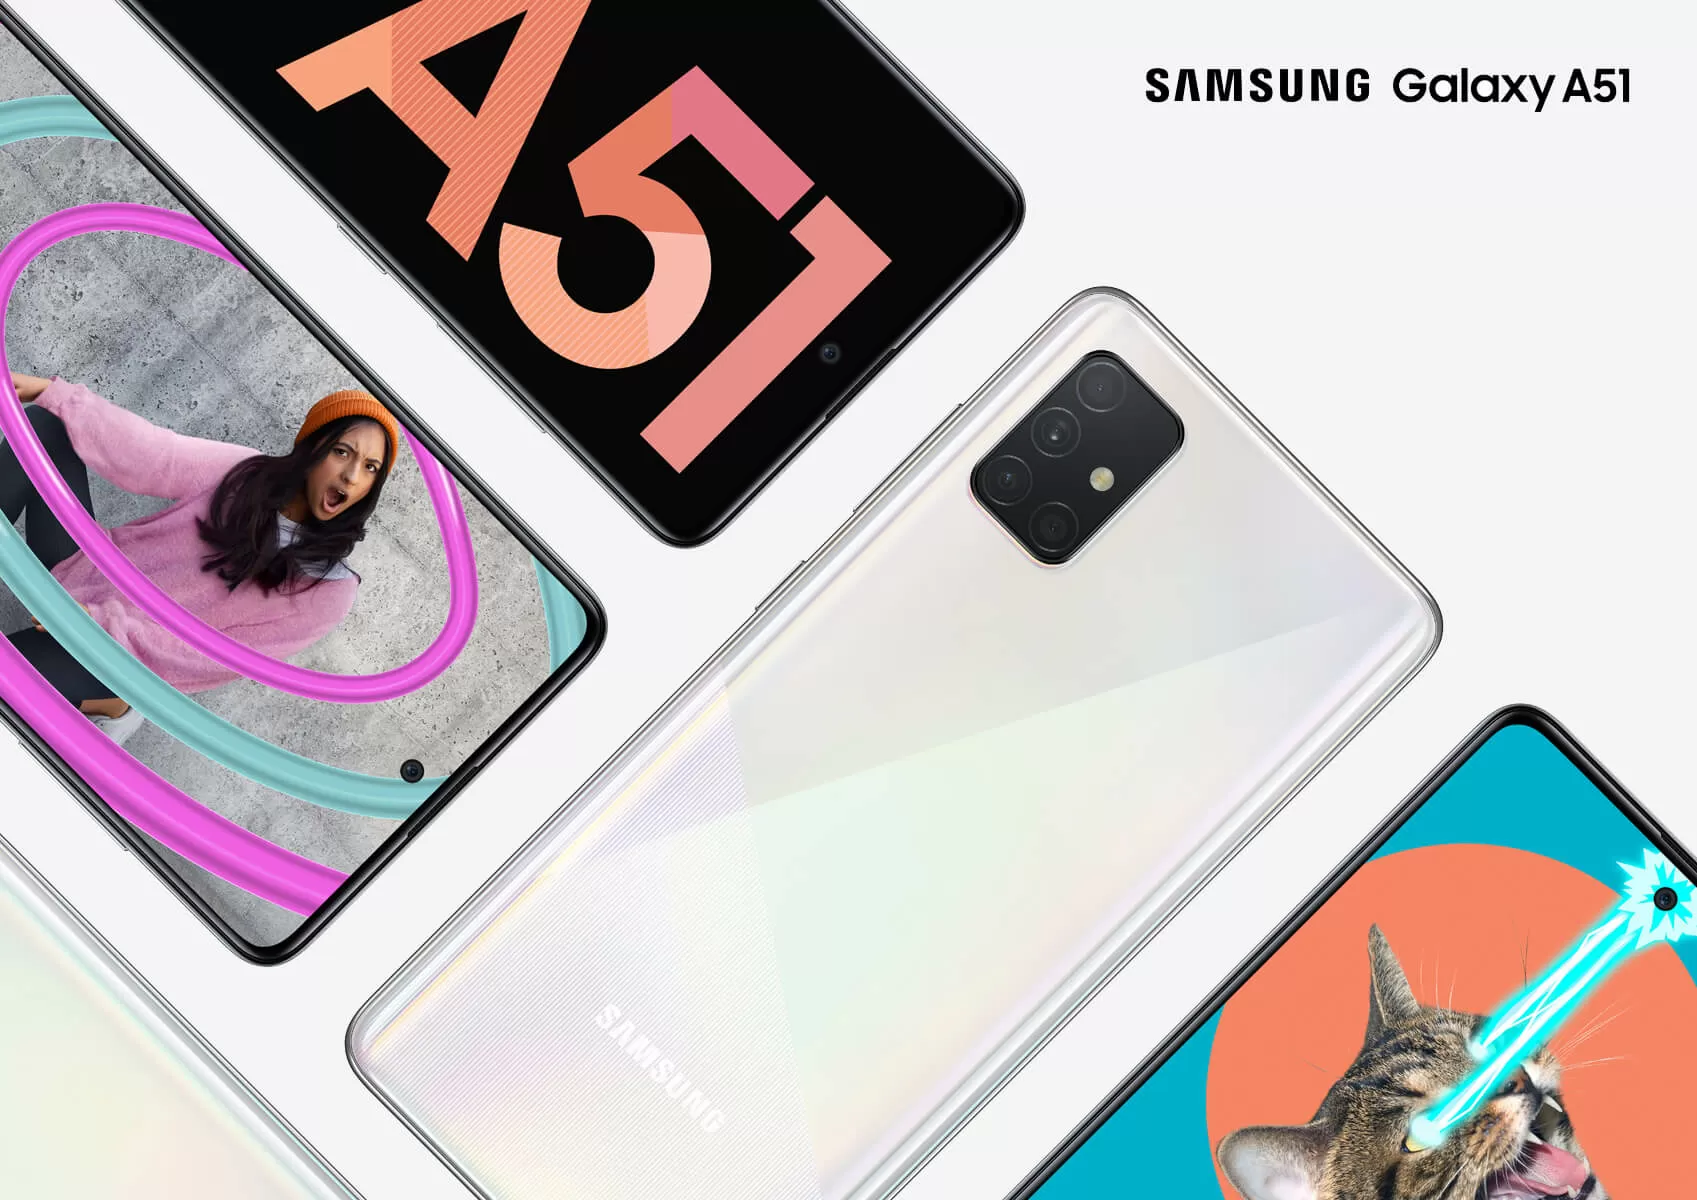 Samsung's answer to the iPhone SE is the $399 Galaxy A51